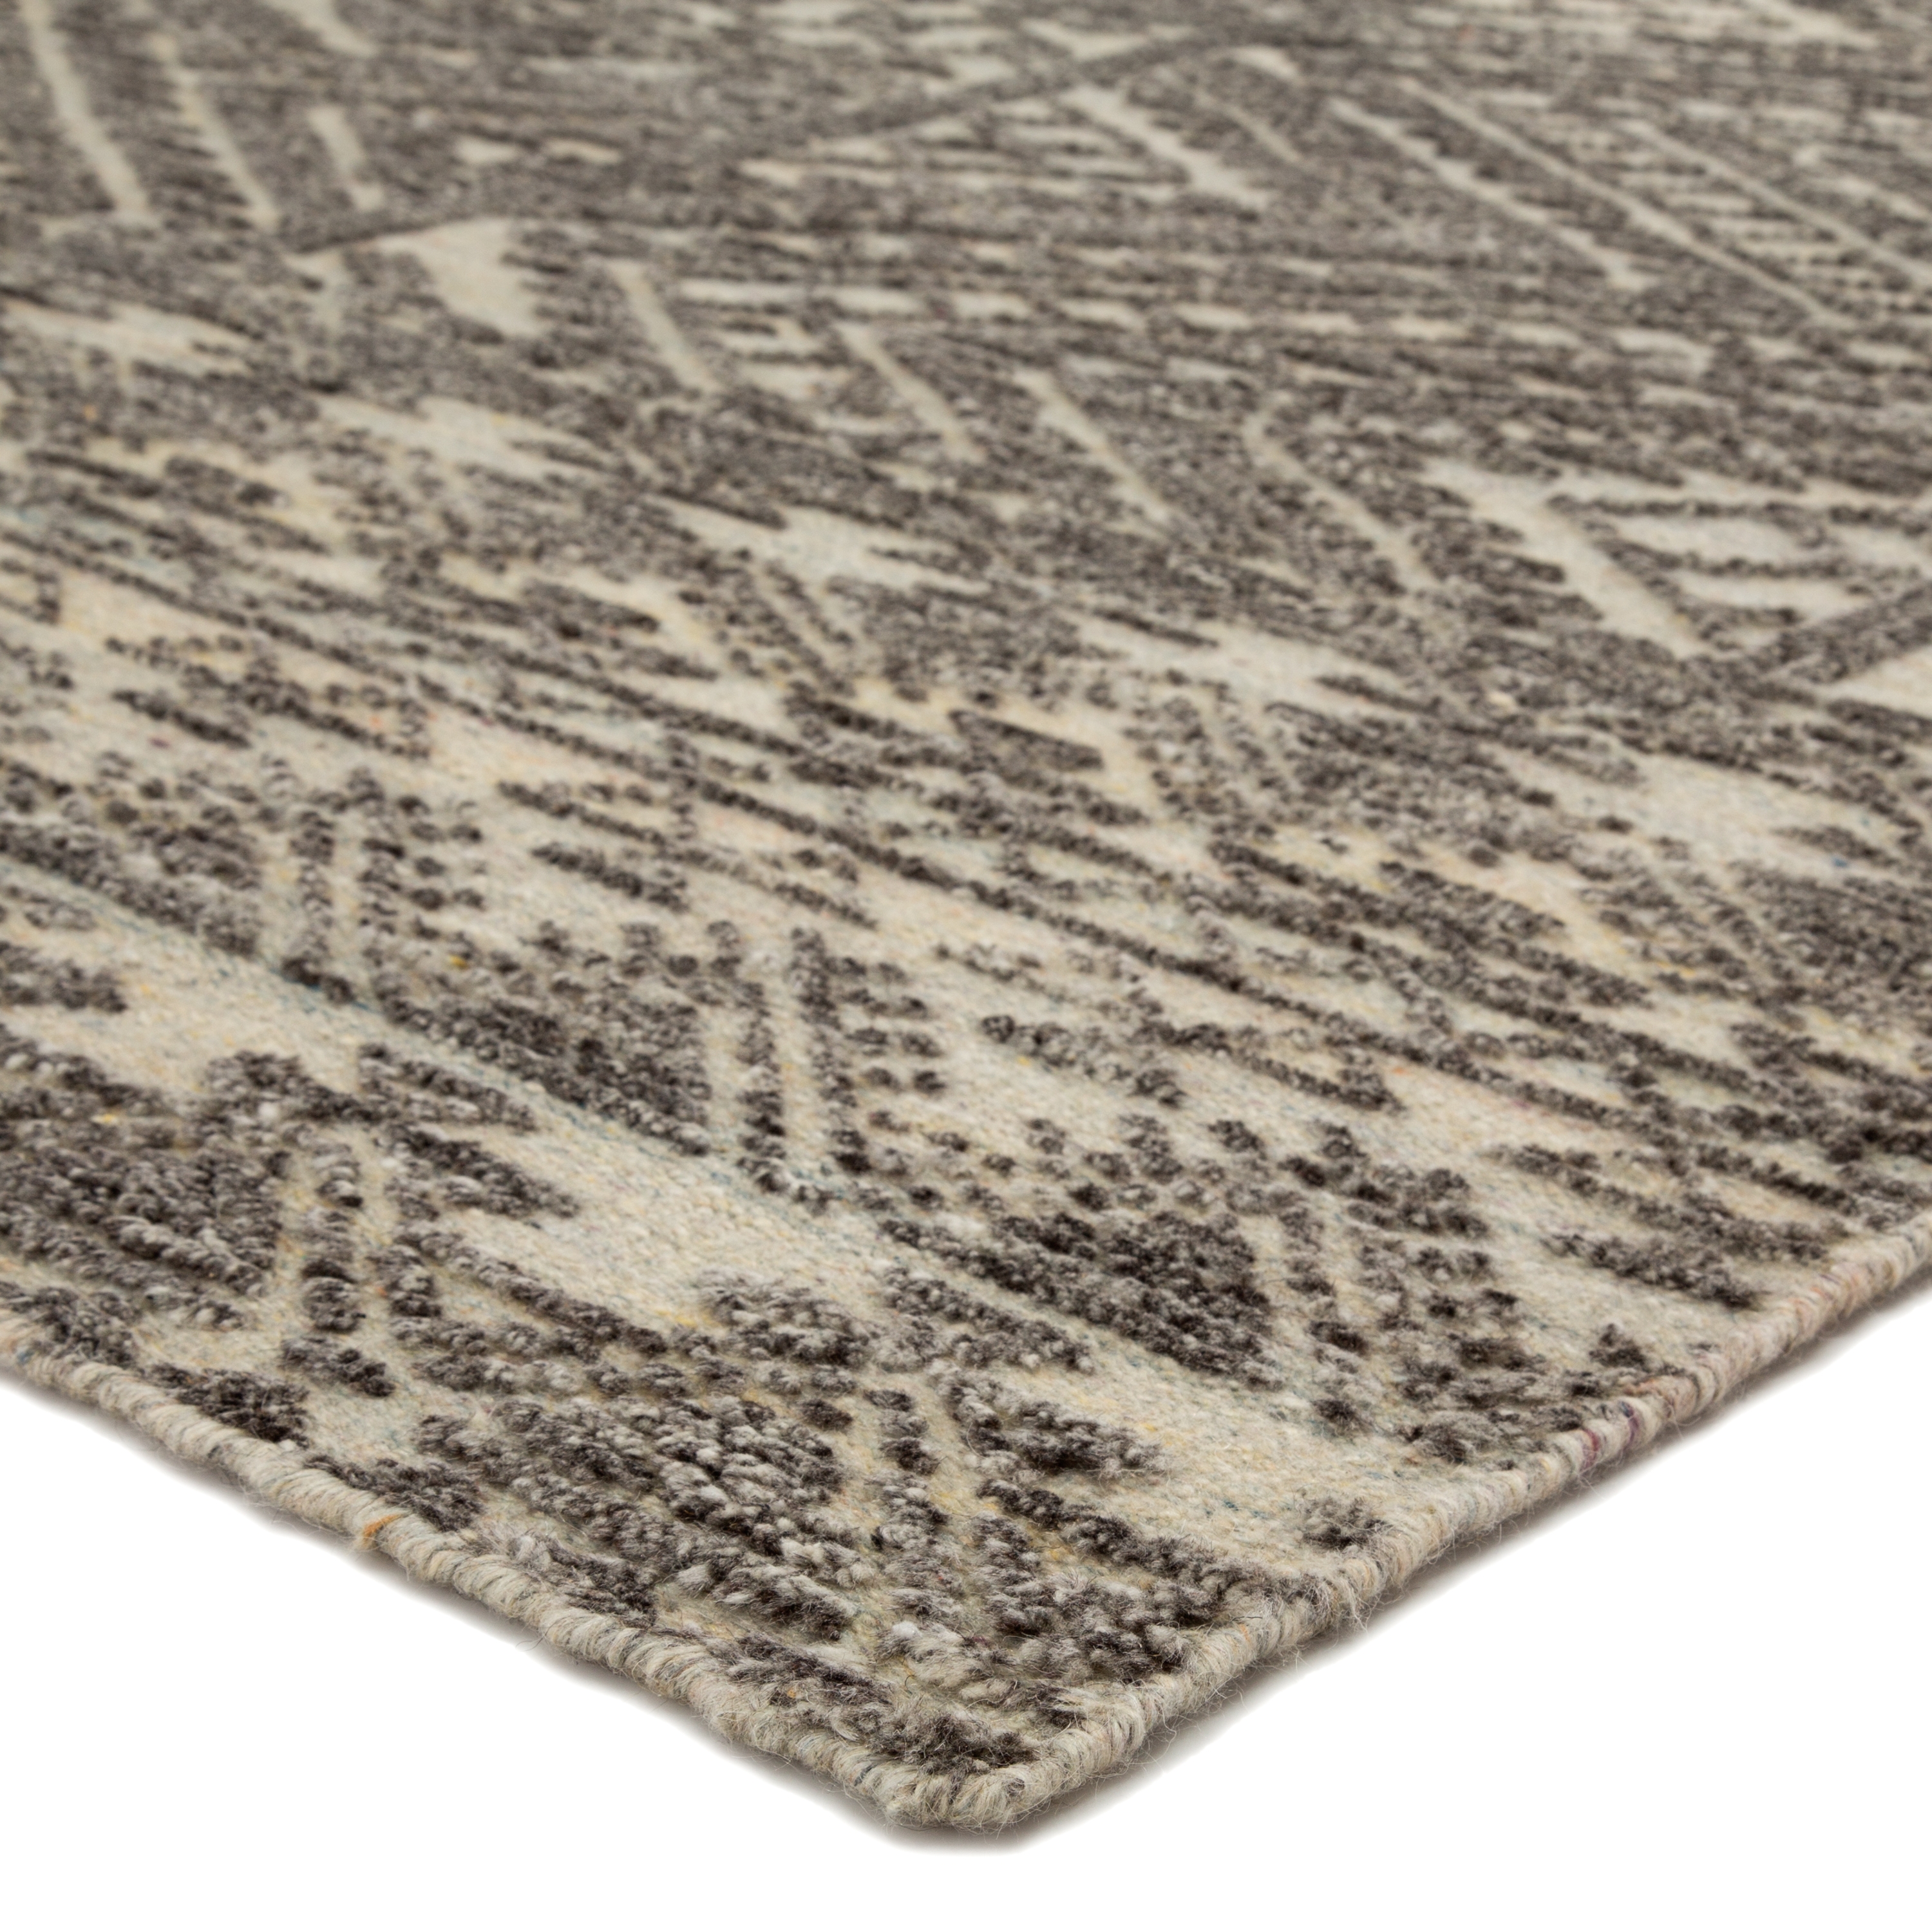 Prentice Hand-Knotted Geometric Dark Gray/ Taupe Area Rug (9'X13') - Image 1